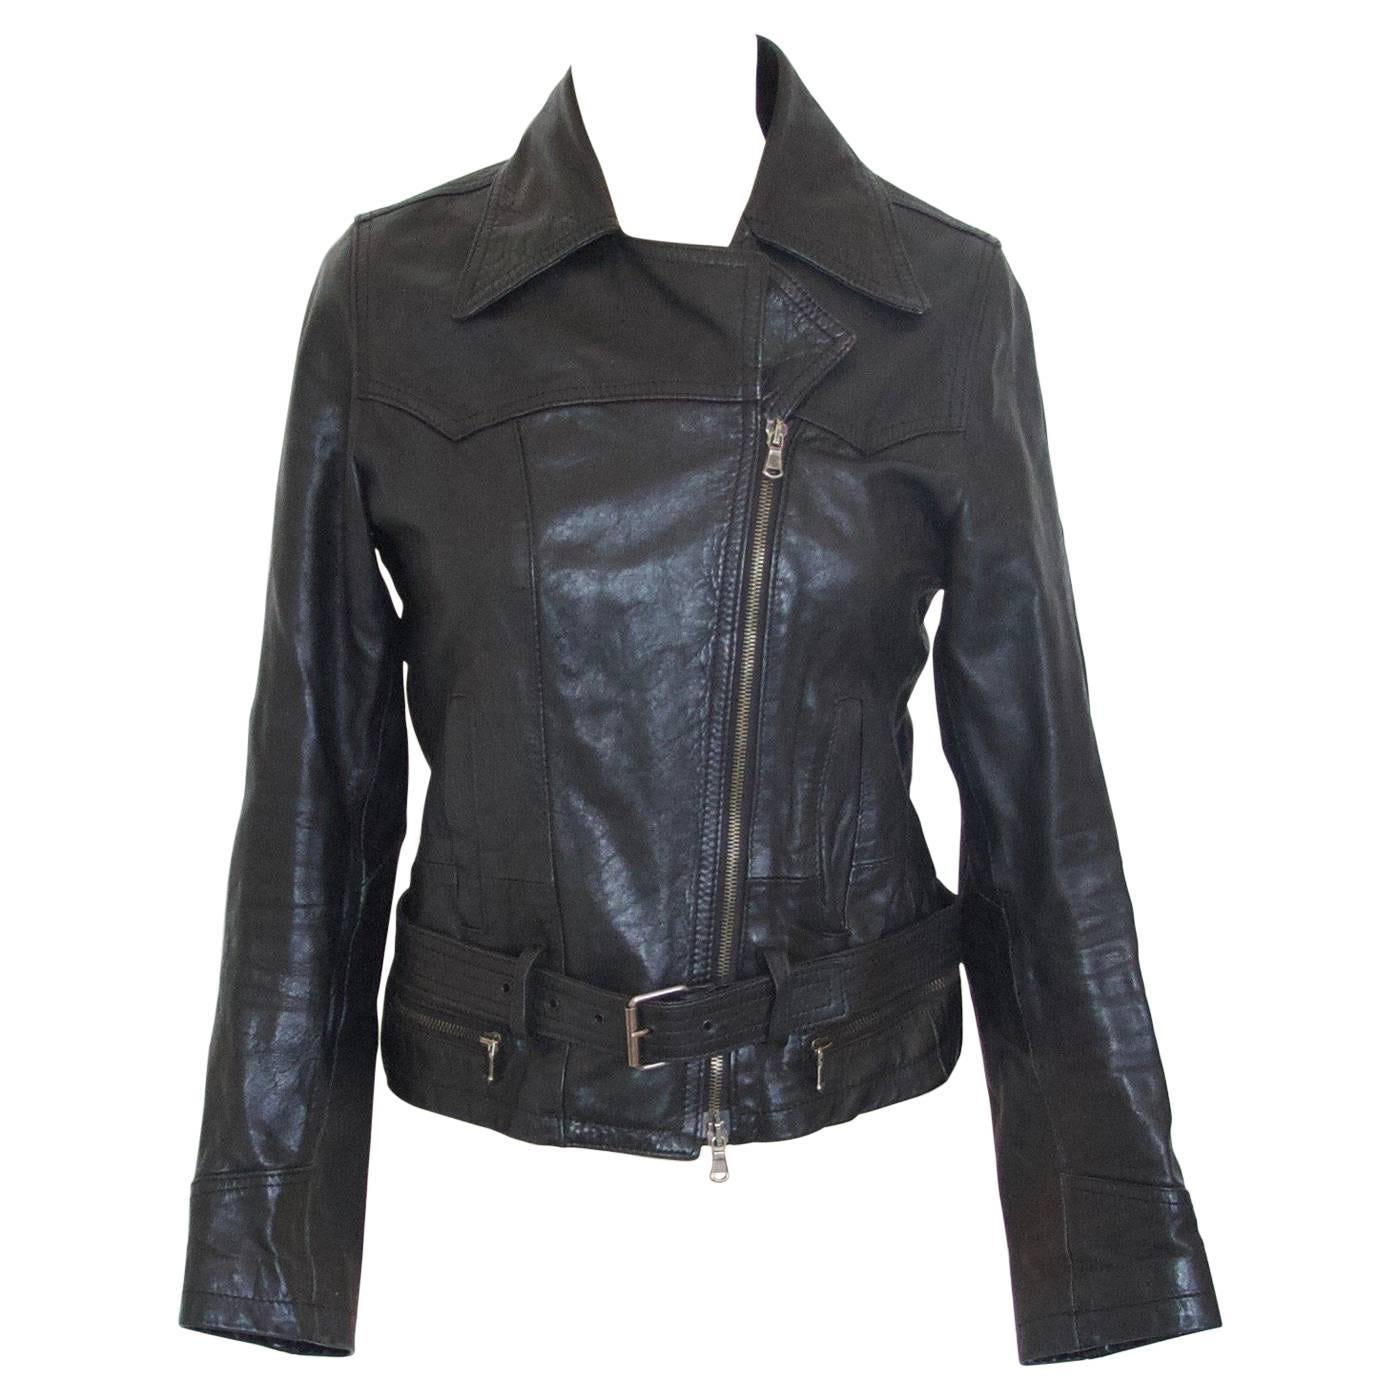 Adriano Goldschmied black leather jacket For Sale